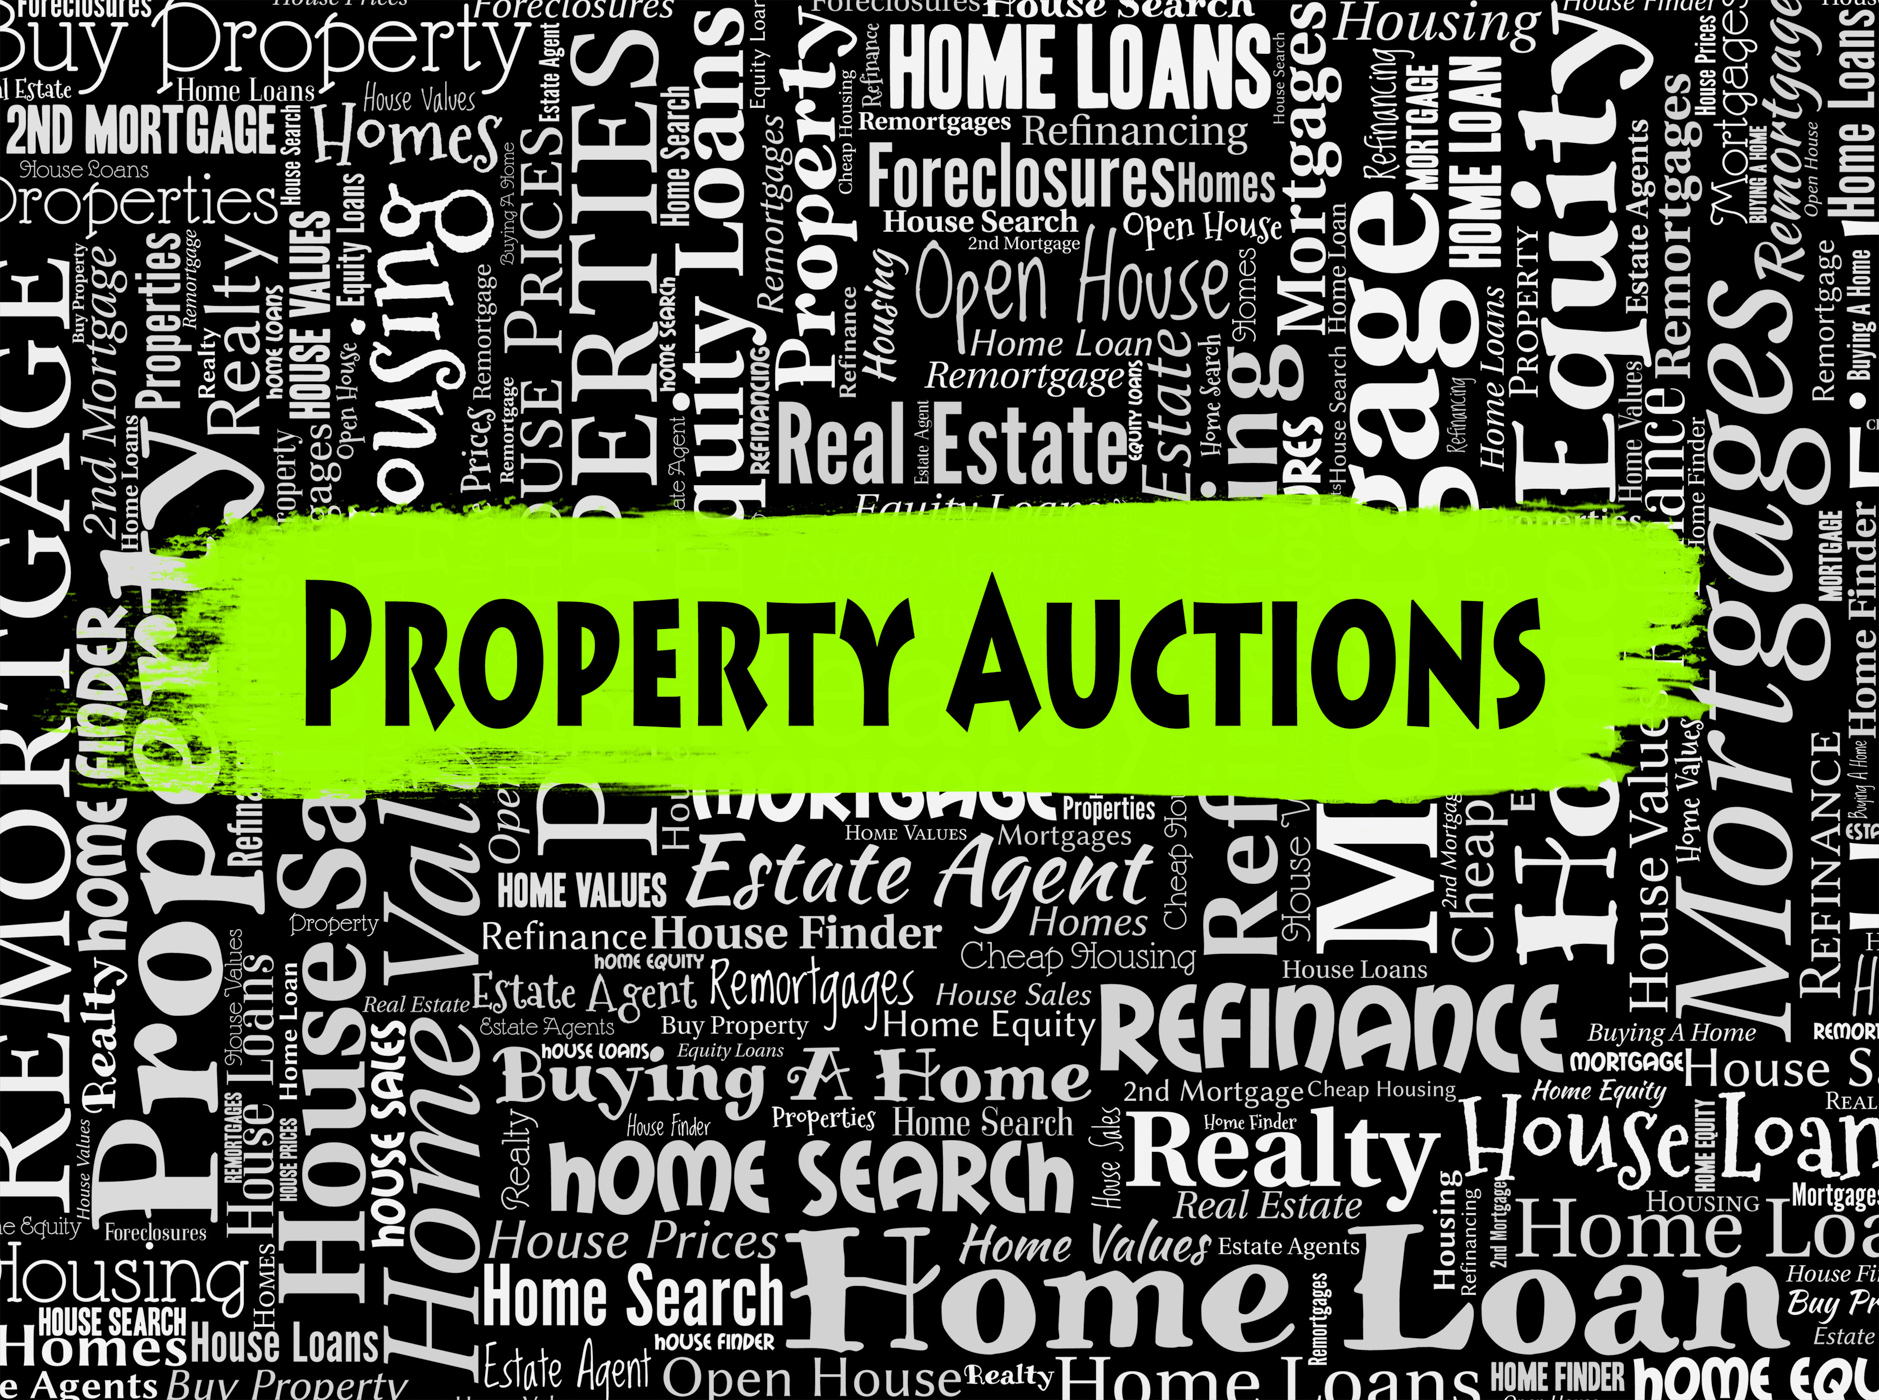 Property auctions represents real estate and apartment photo